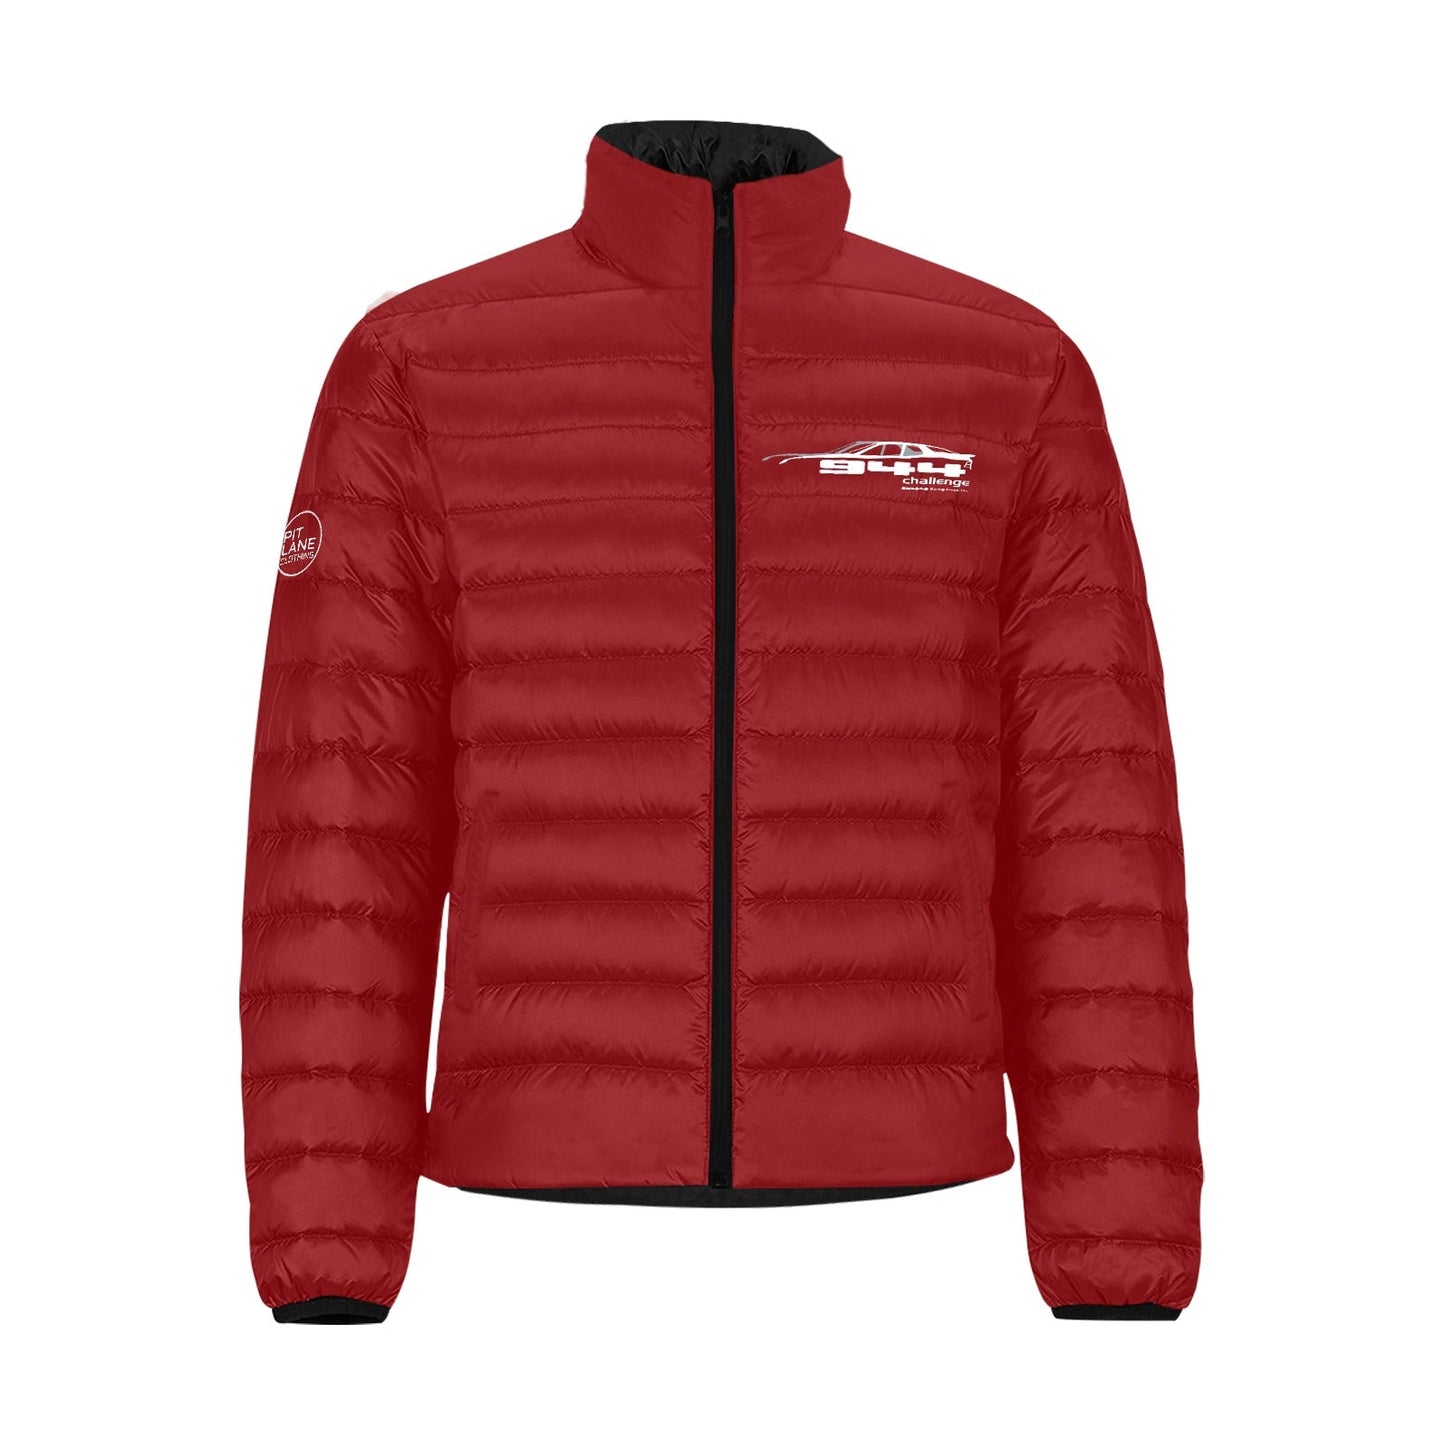 944 Challenge Series Australia official puffer jacket - red